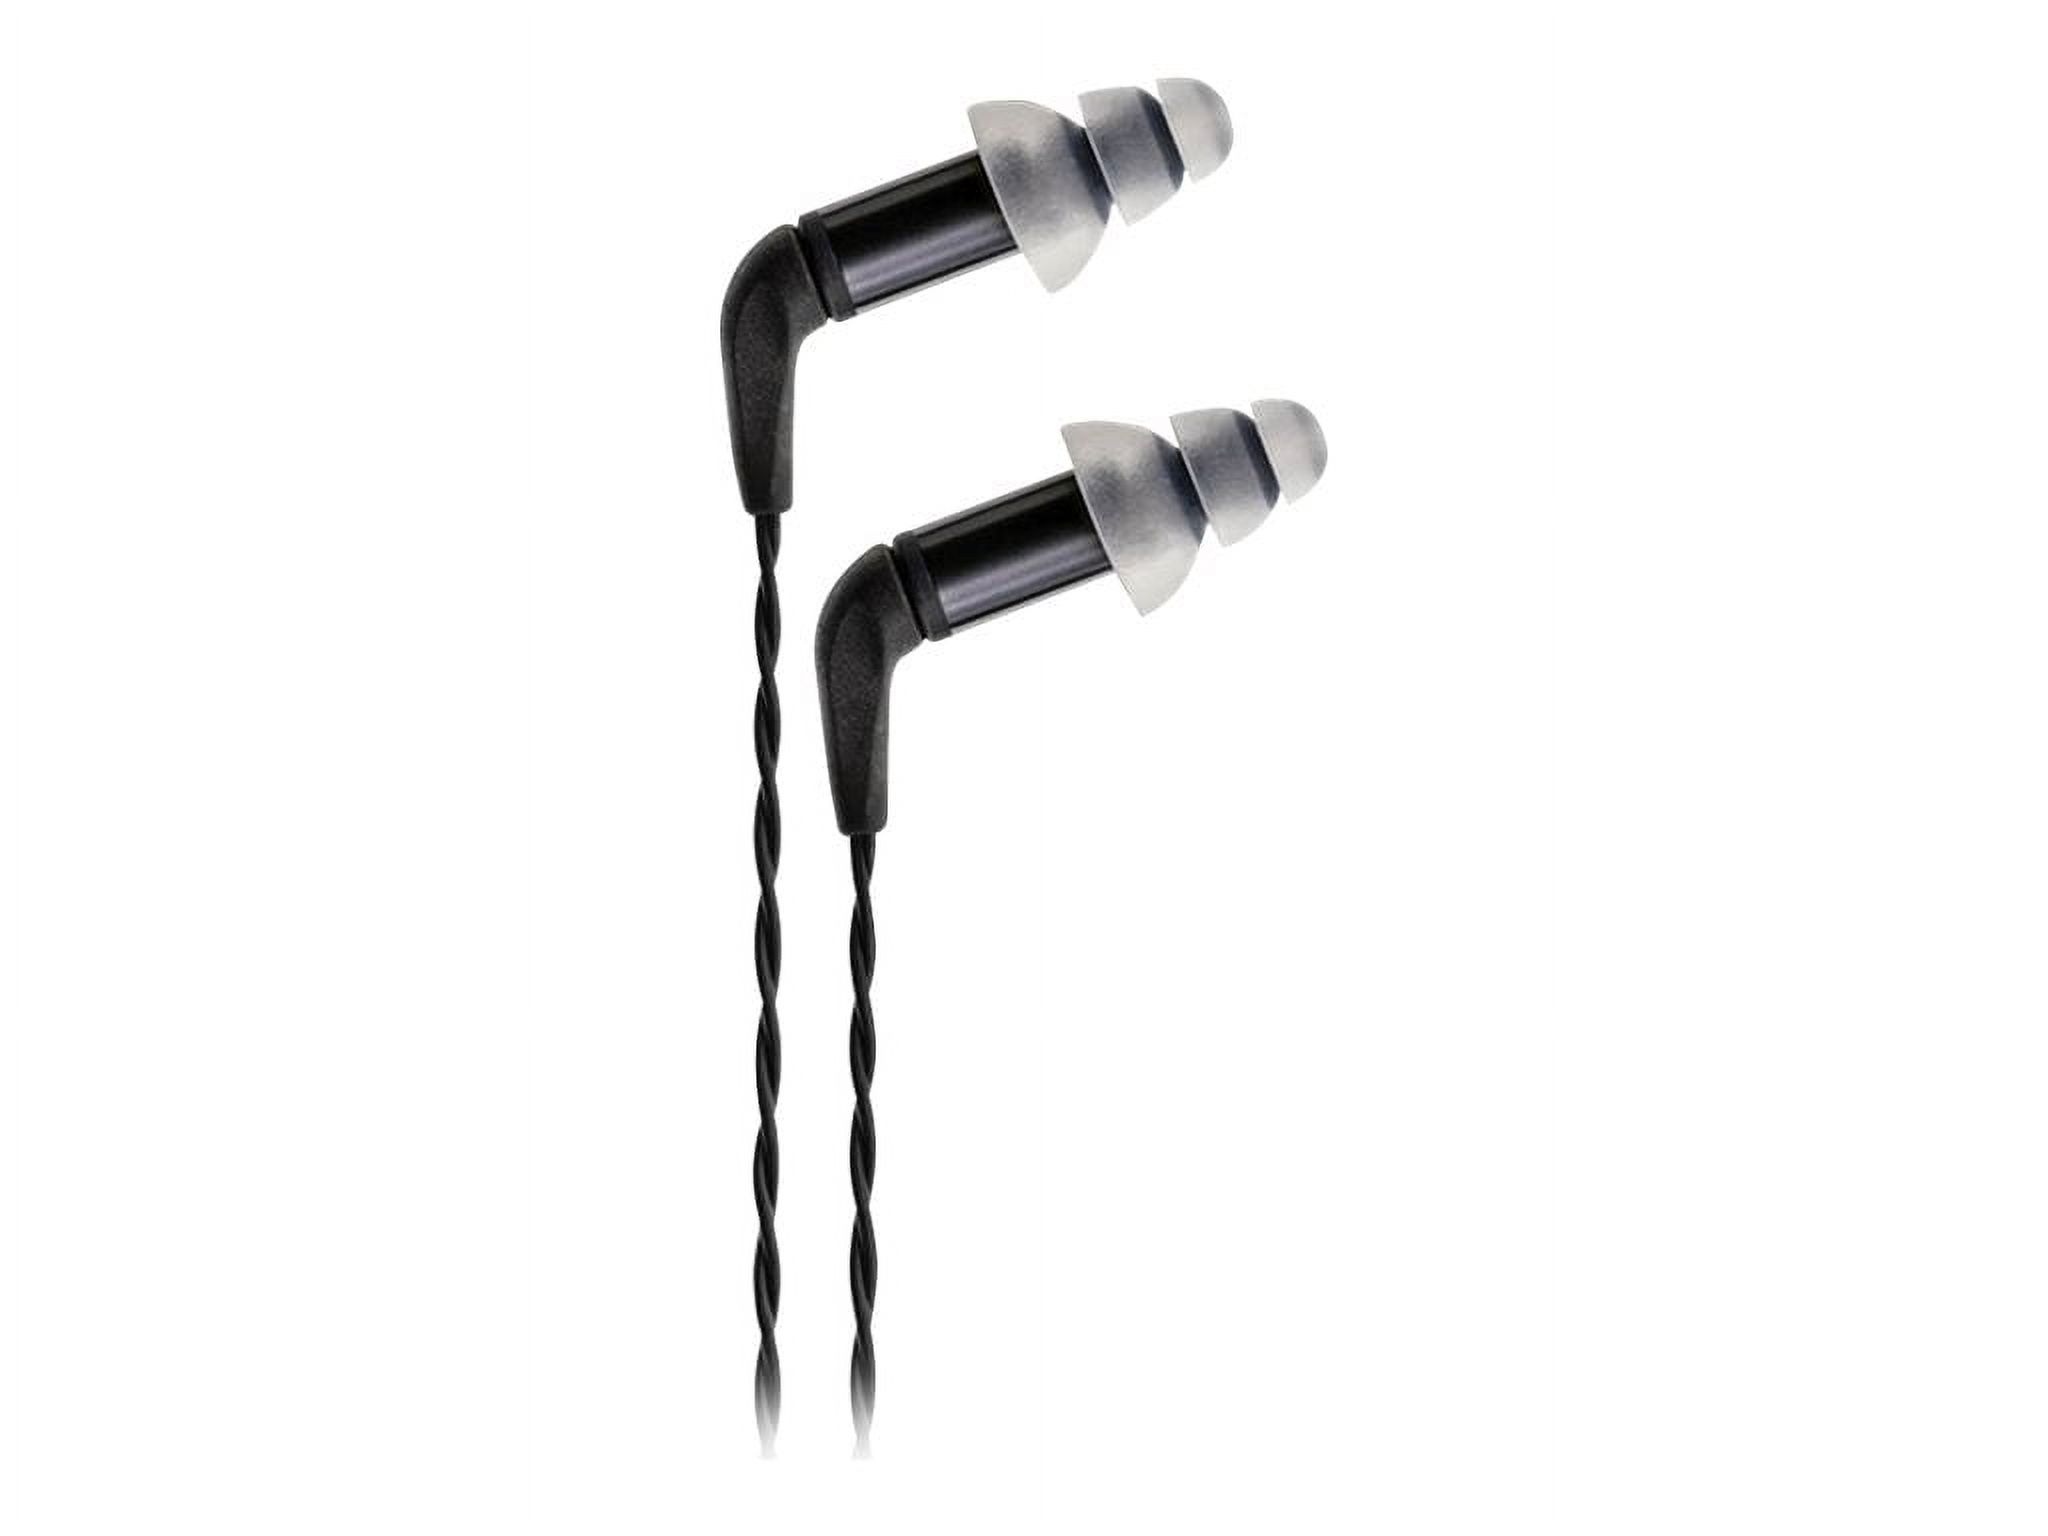 Etymotic Research ER4SR Studio Reference Precision Matched In-Ear Earphones (Balanced Armature Drivers, Noise Isolating, High Fidelity, World Leader Response Accuracy) - image 2 of 3